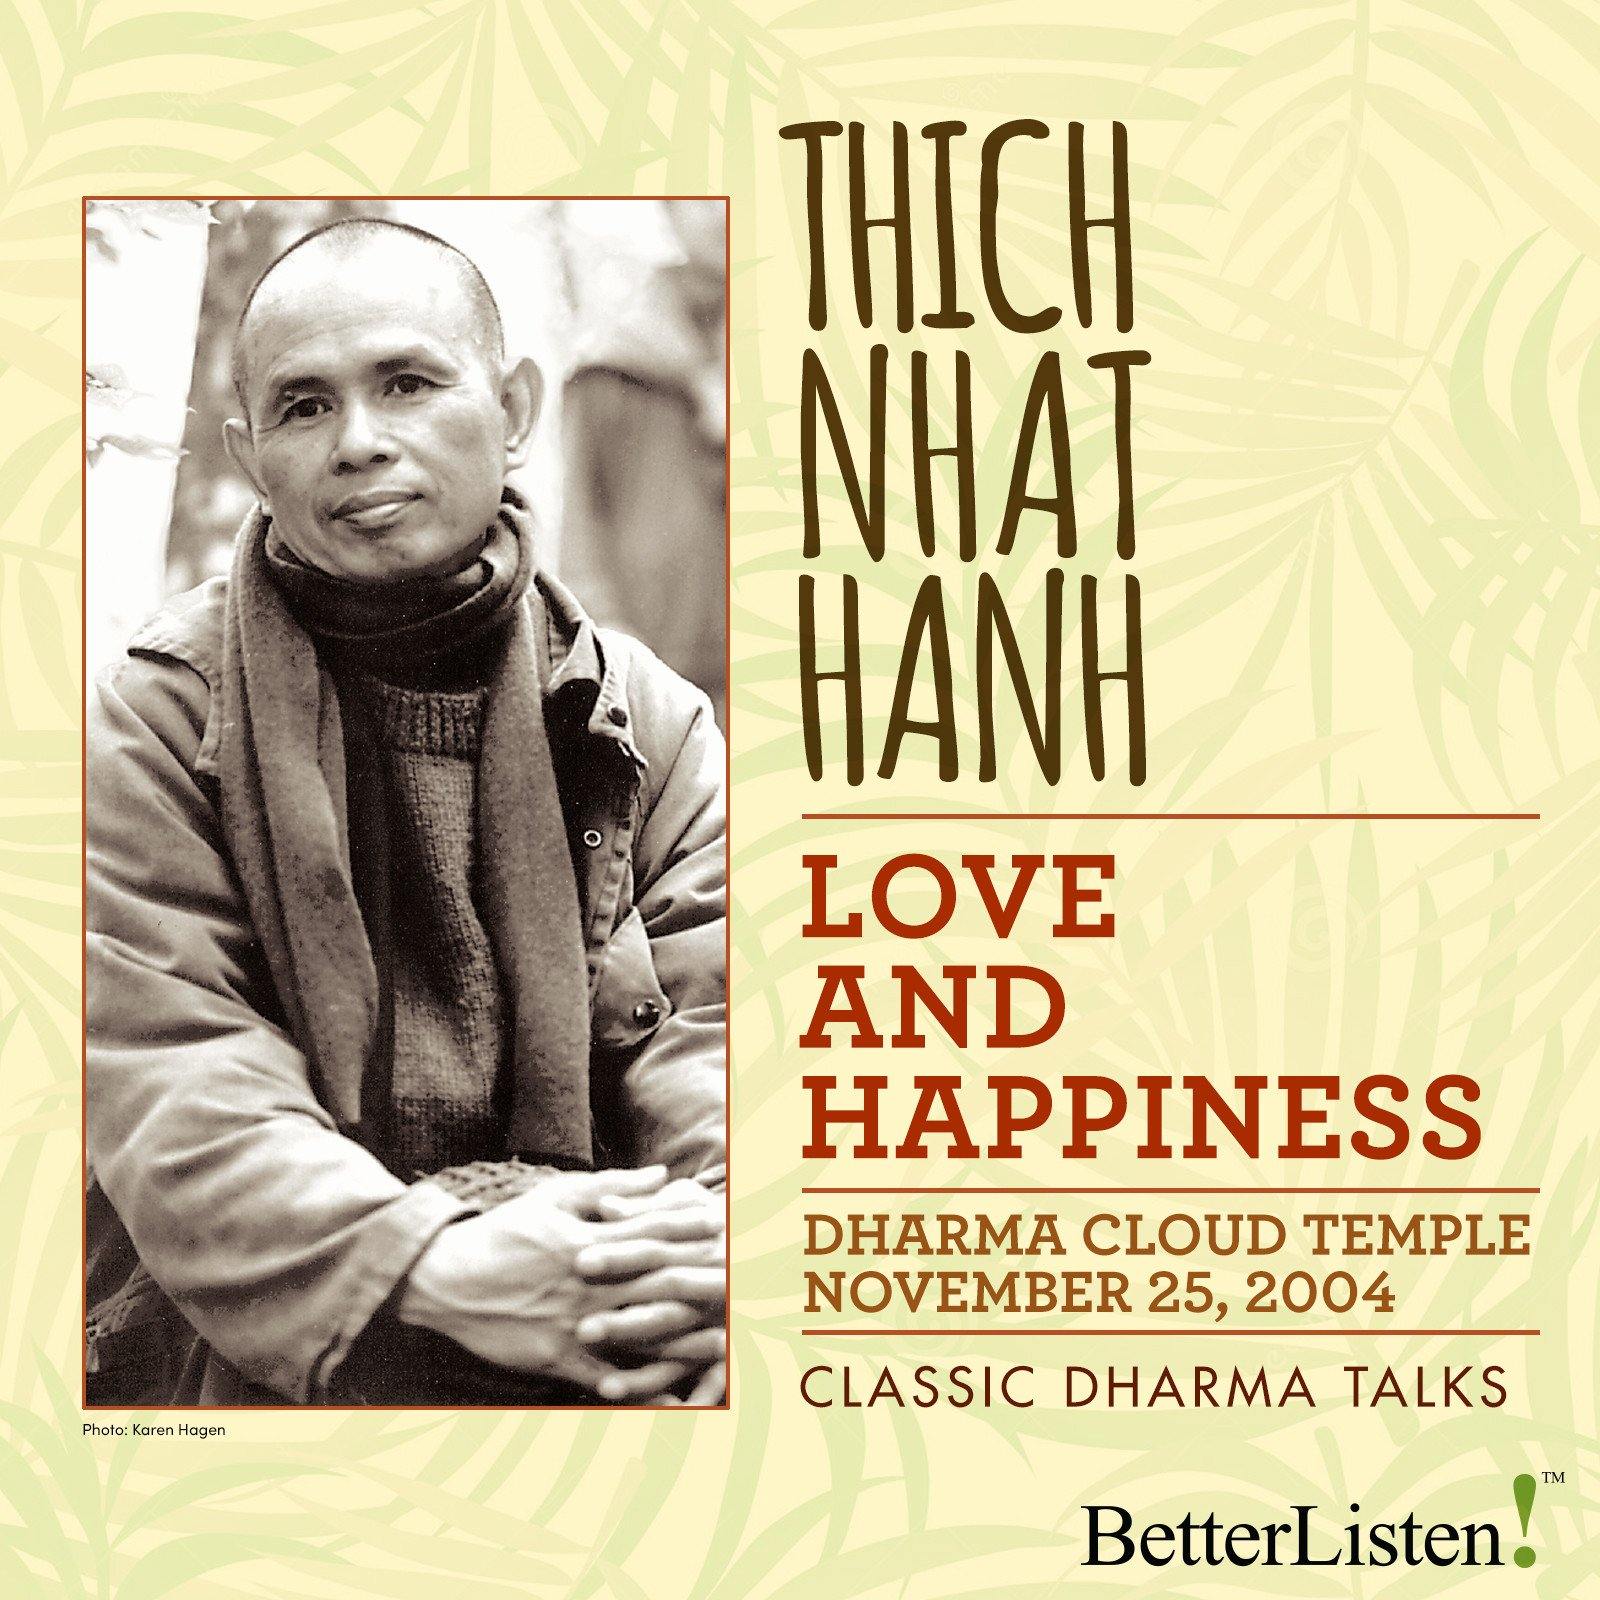 Love and Happiness by Thich Nhat Hanh Audio Program Parallax Press - BetterListen!